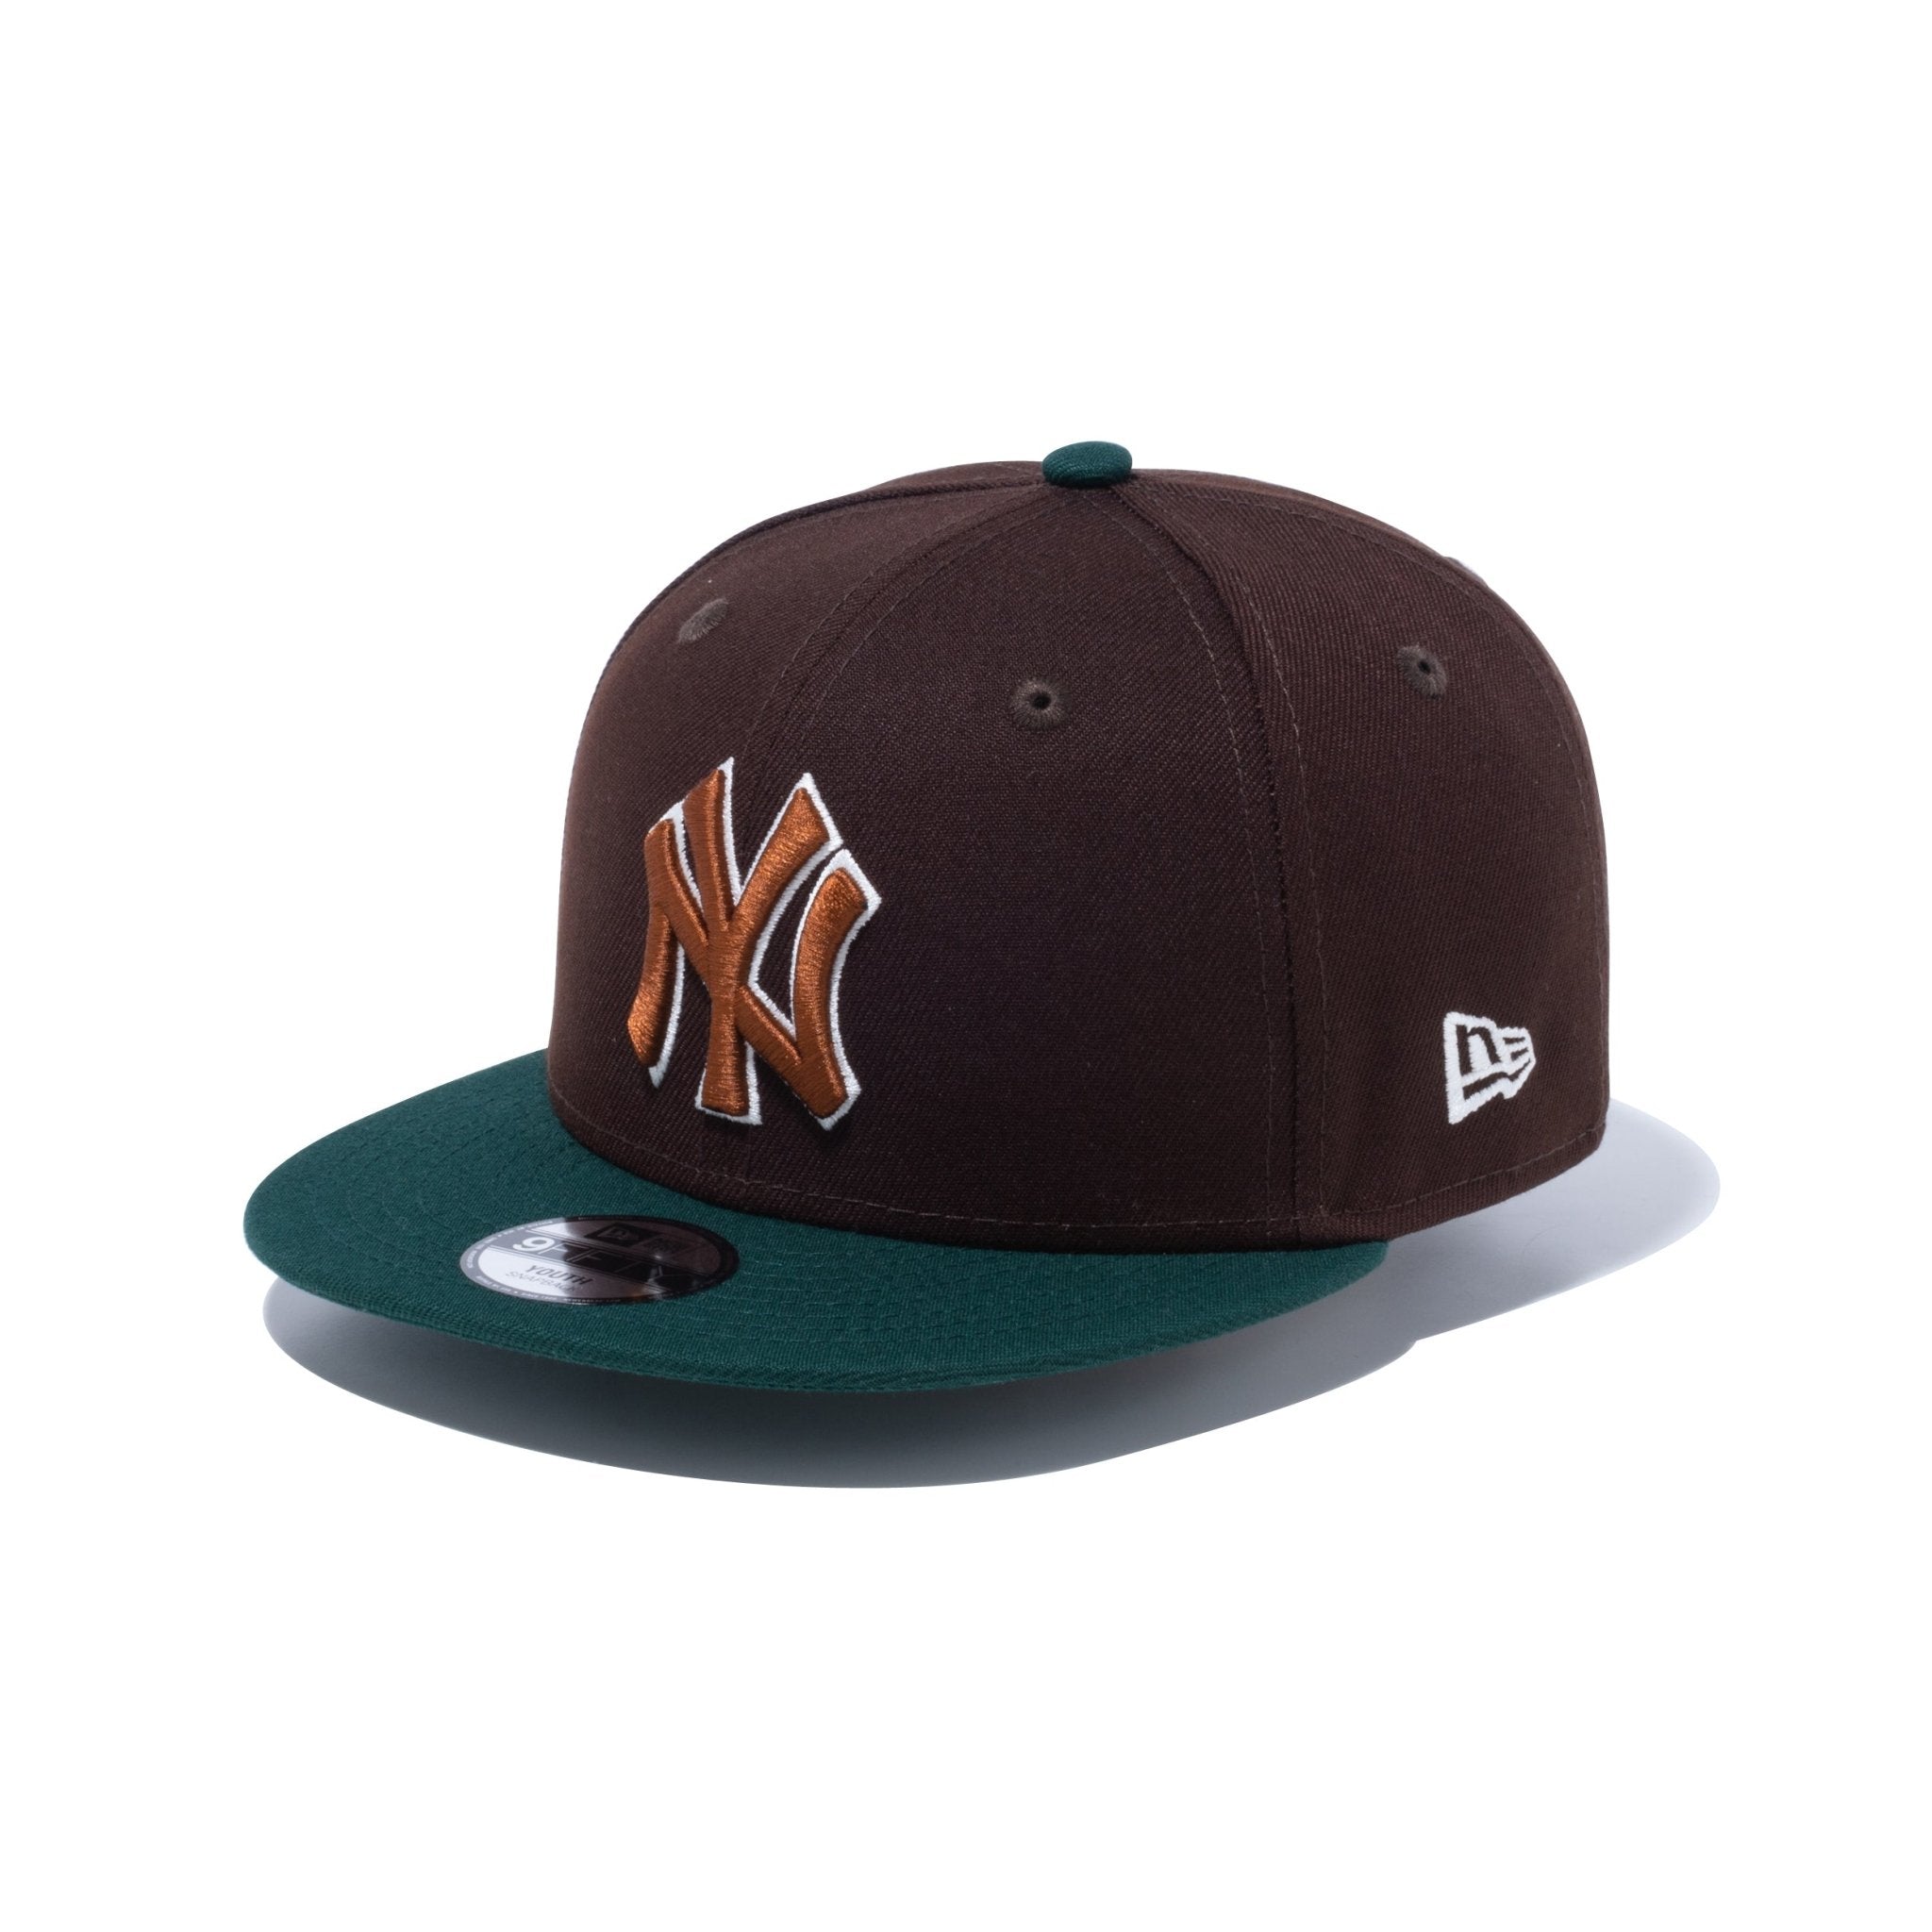 Youth 9FIFTY Beef and Broccoli ニューヨーク・ヤンキース